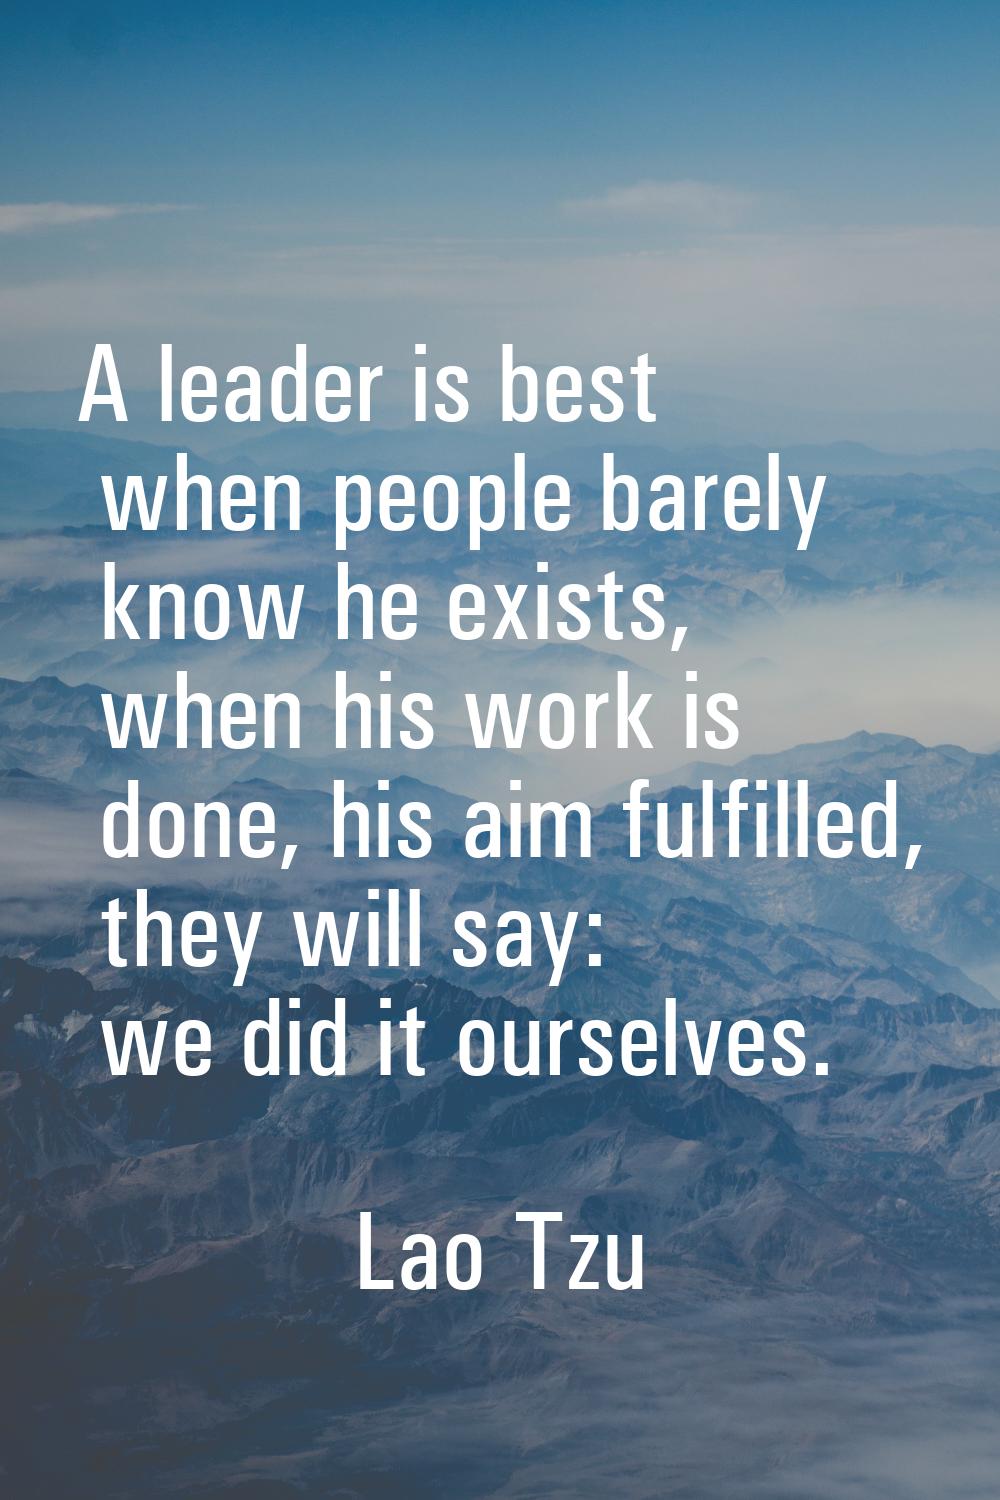 A leader is best when people barely know he exists, when his work is done, his aim fulfilled, they 